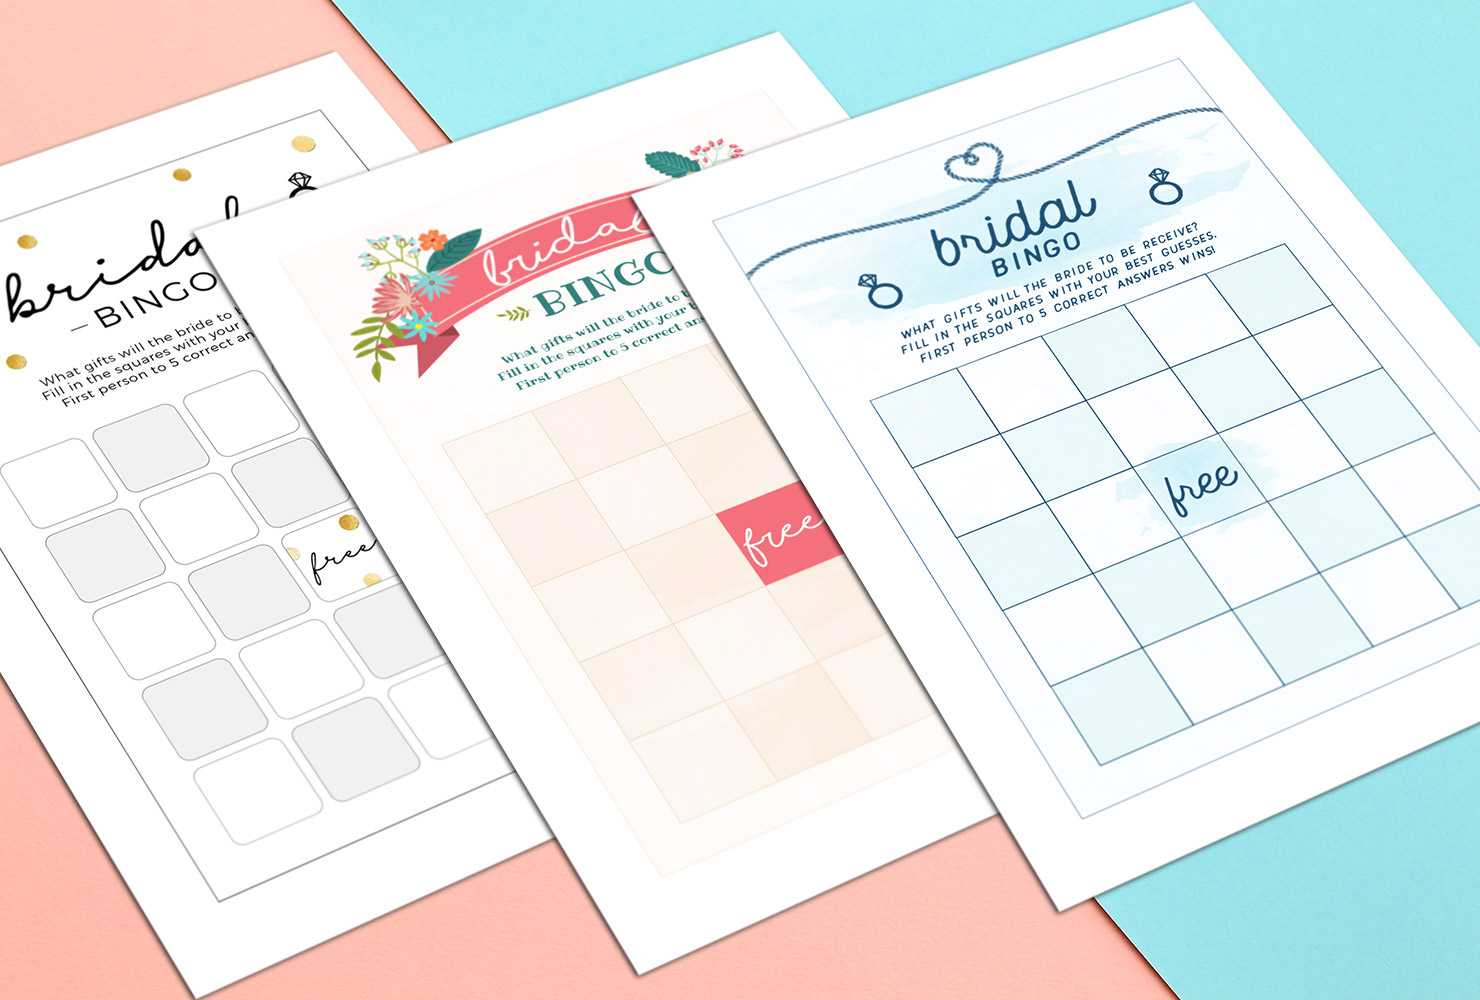 How To Play Bridal Shower Bingo (With Printables) | Shutterfly Intended For Blank Bridal Shower Bingo Template